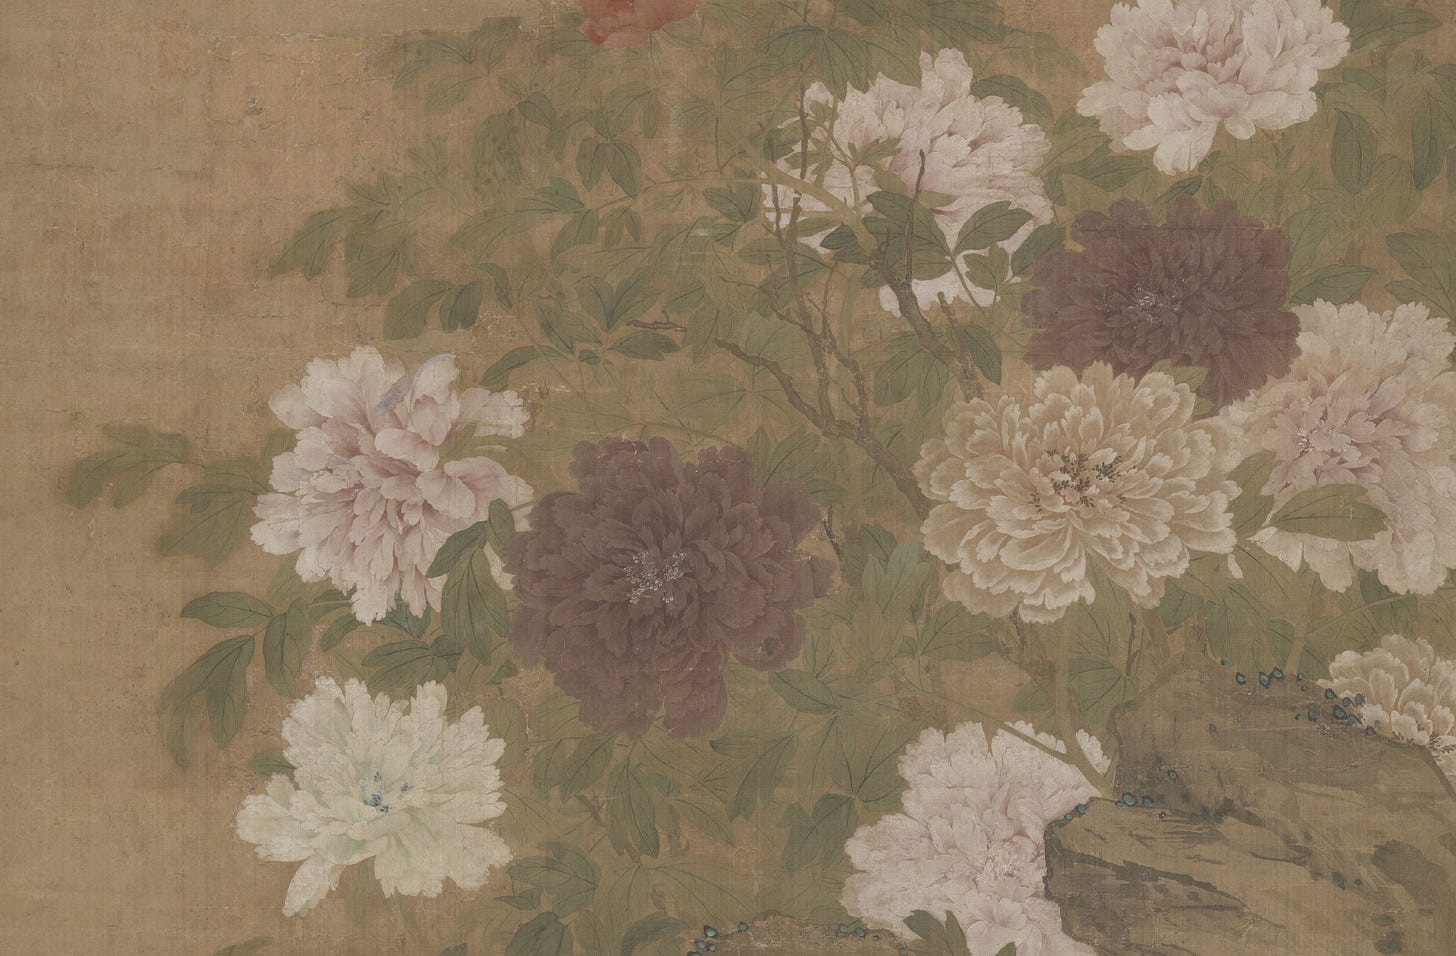 Chinese painting from the 18th century of blossoming peonies in white, pink, and purple